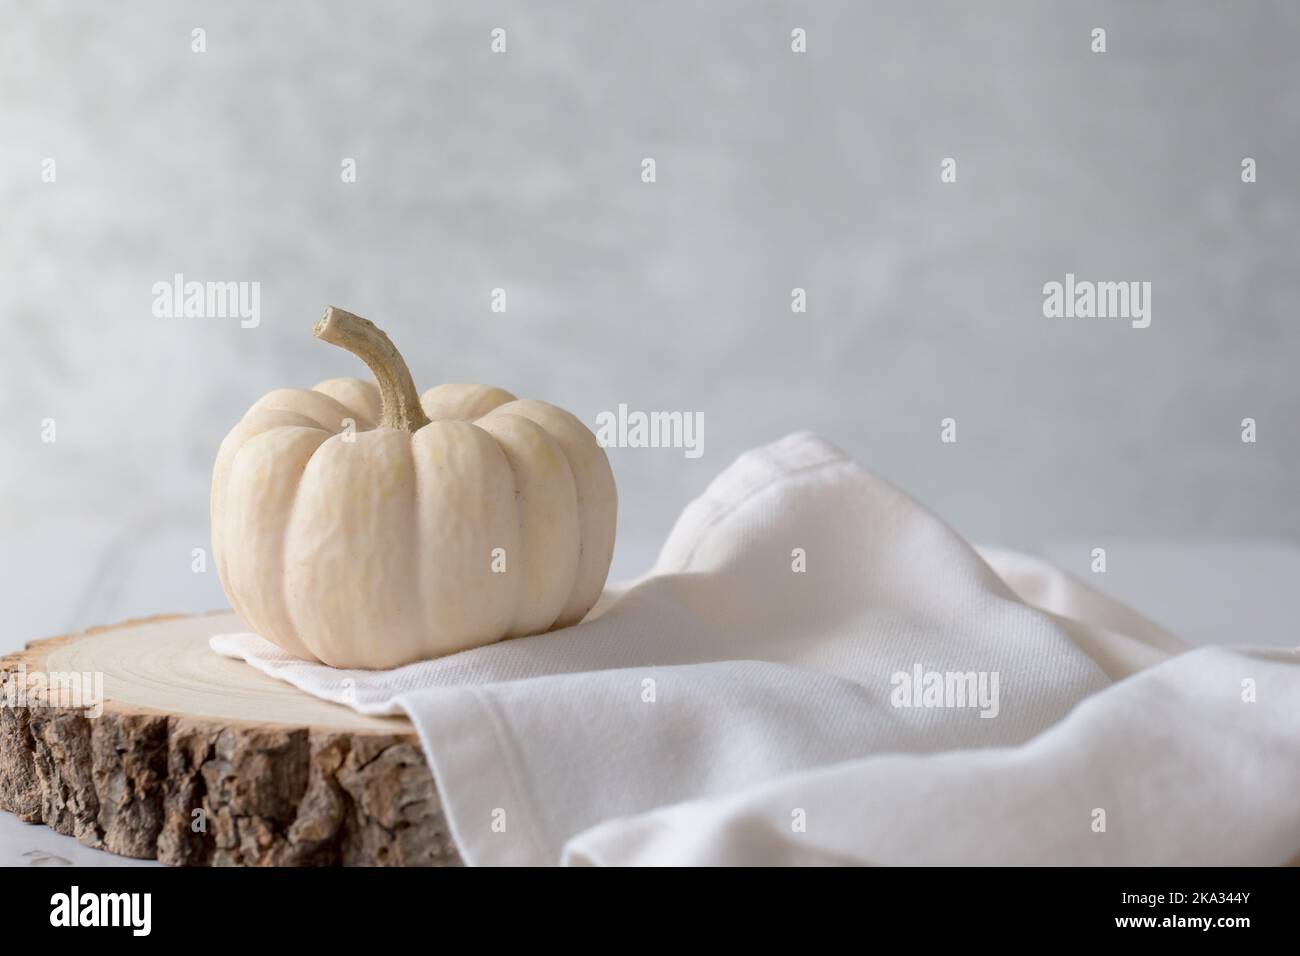 Baby Boo Ghost pumpkin on wooden block with cream linen napkin against a light background. Crisp, light and airy still life . with space for copy Stock Photo